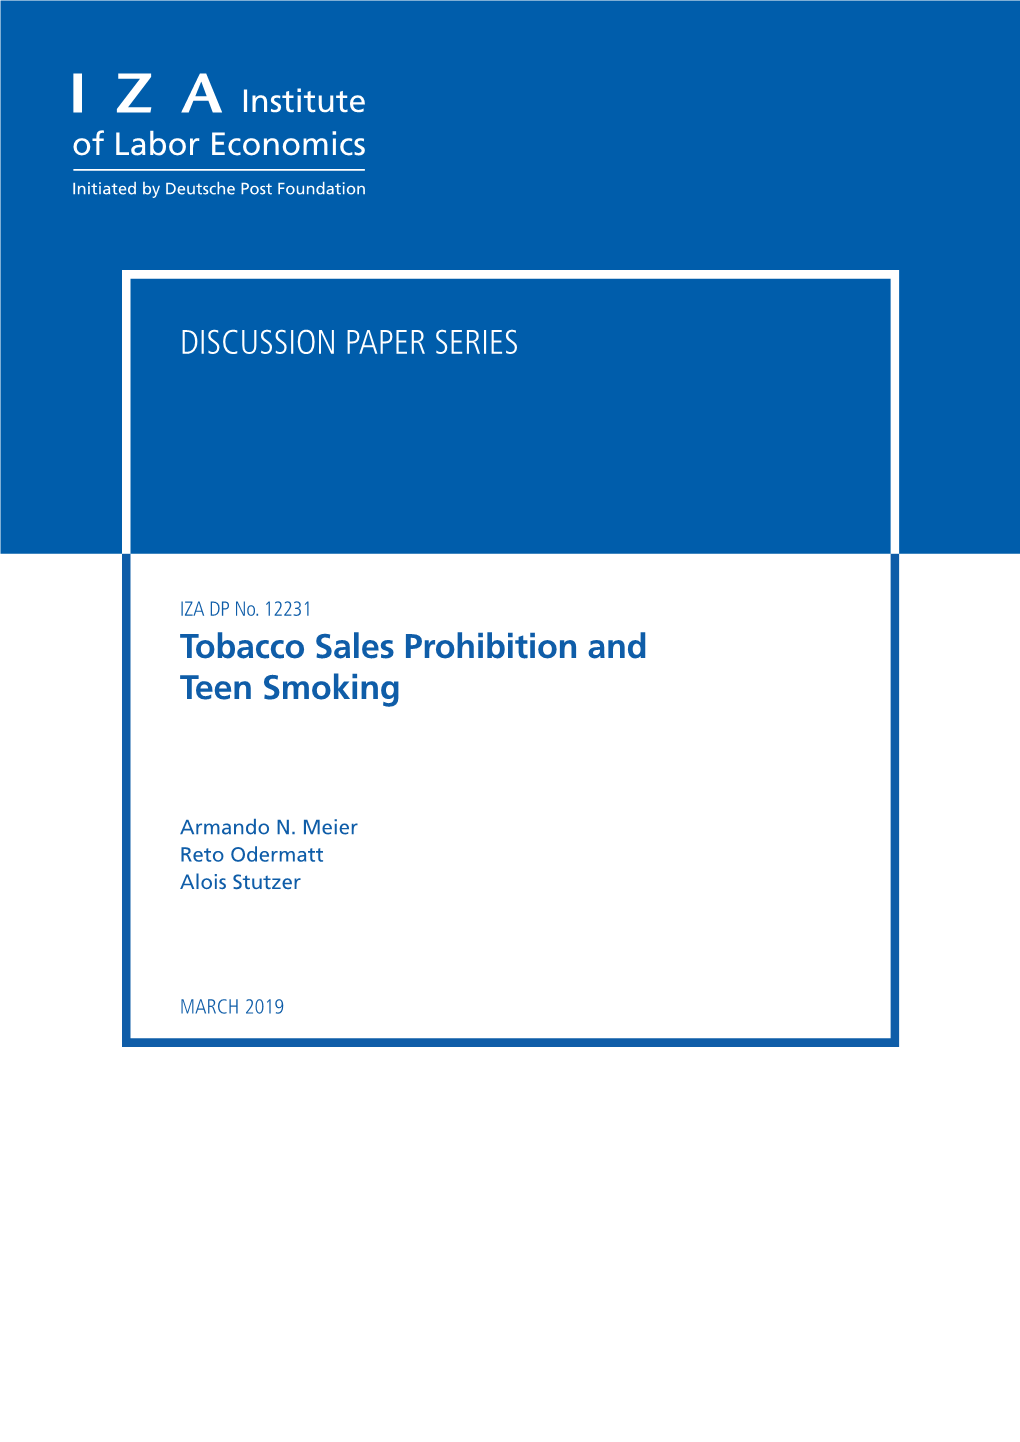 Tobacco Sales Prohibition and Teen Smoking